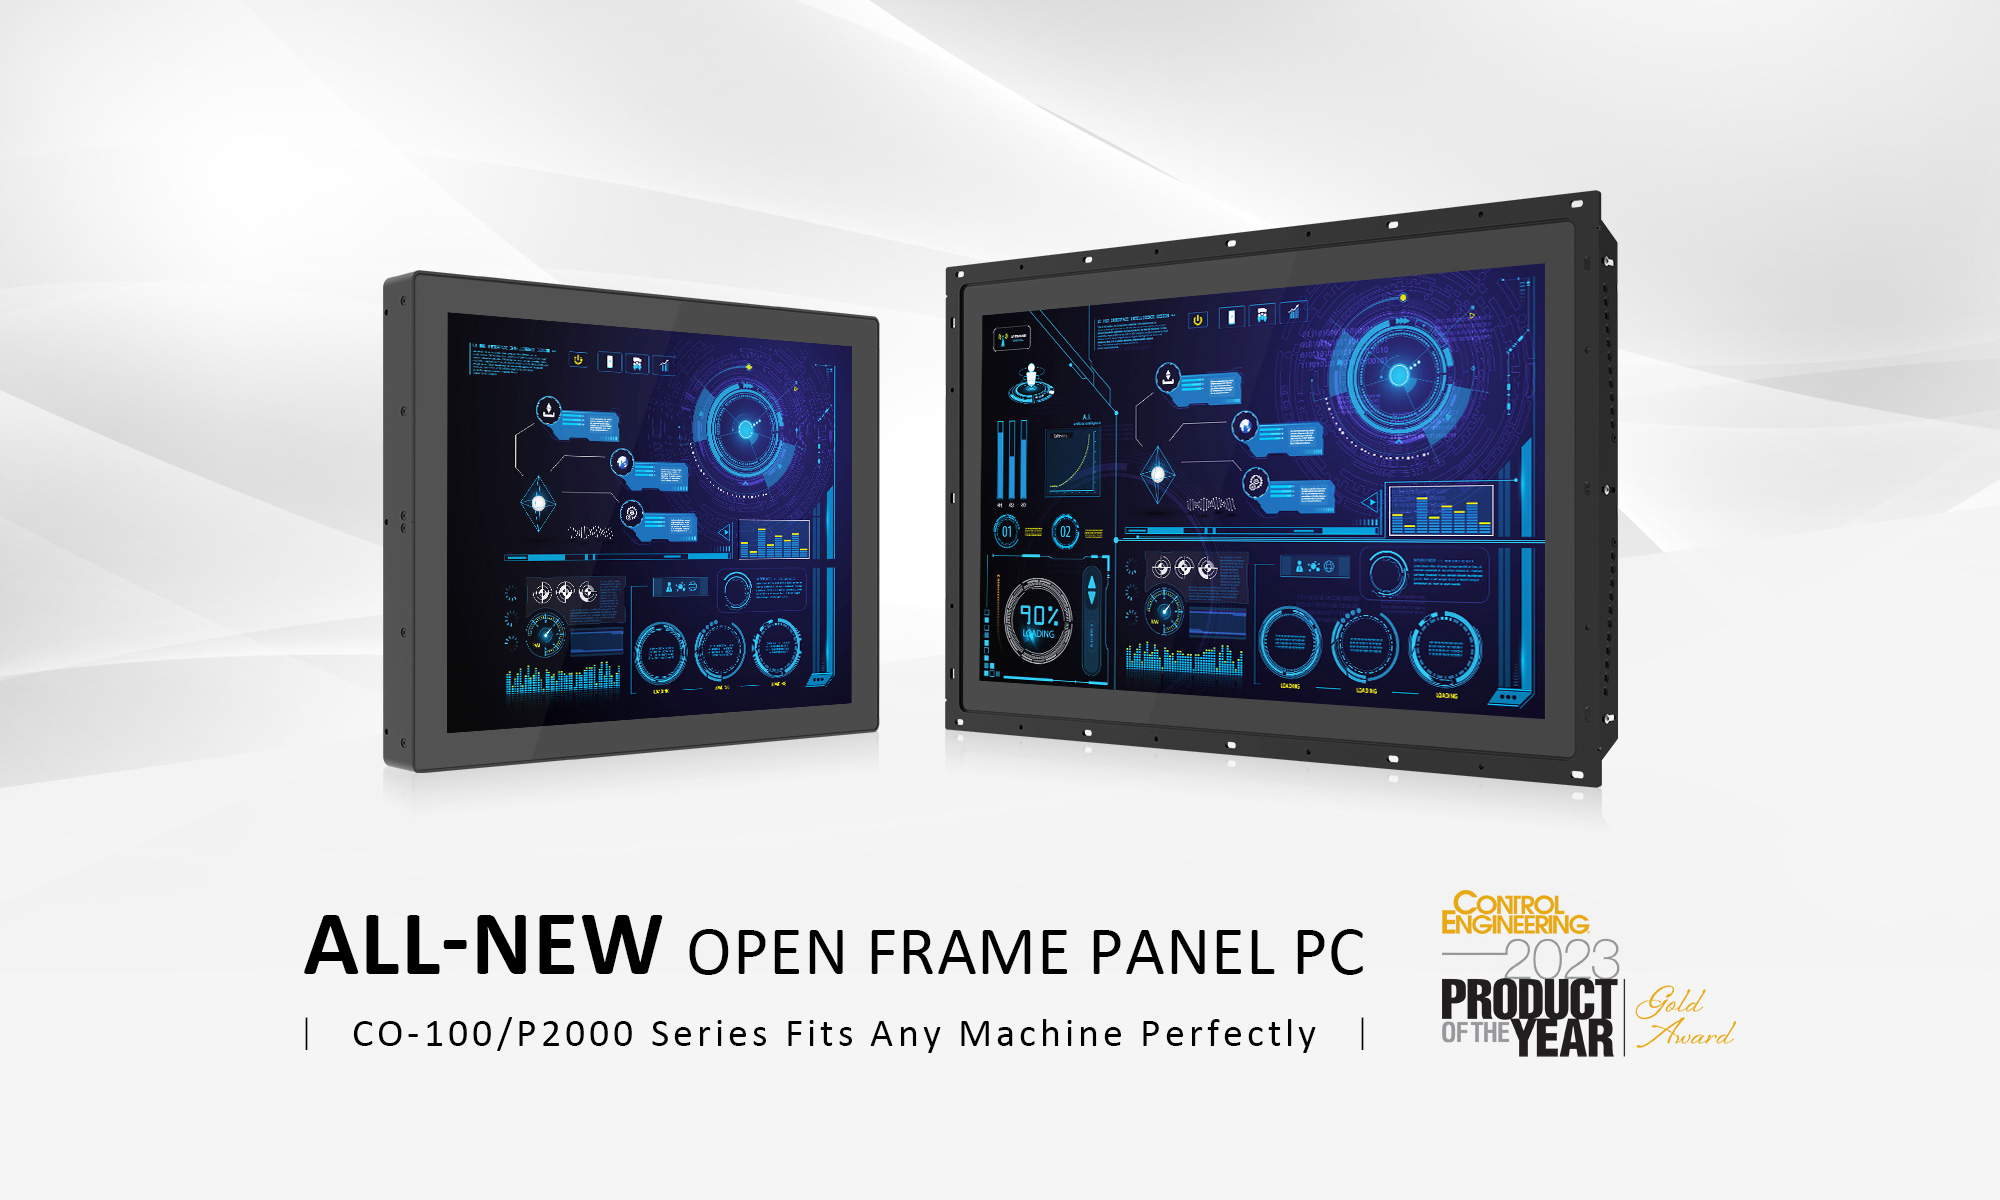 High-Performance Open Frame Panel PC (CO-100/P2000 Series)